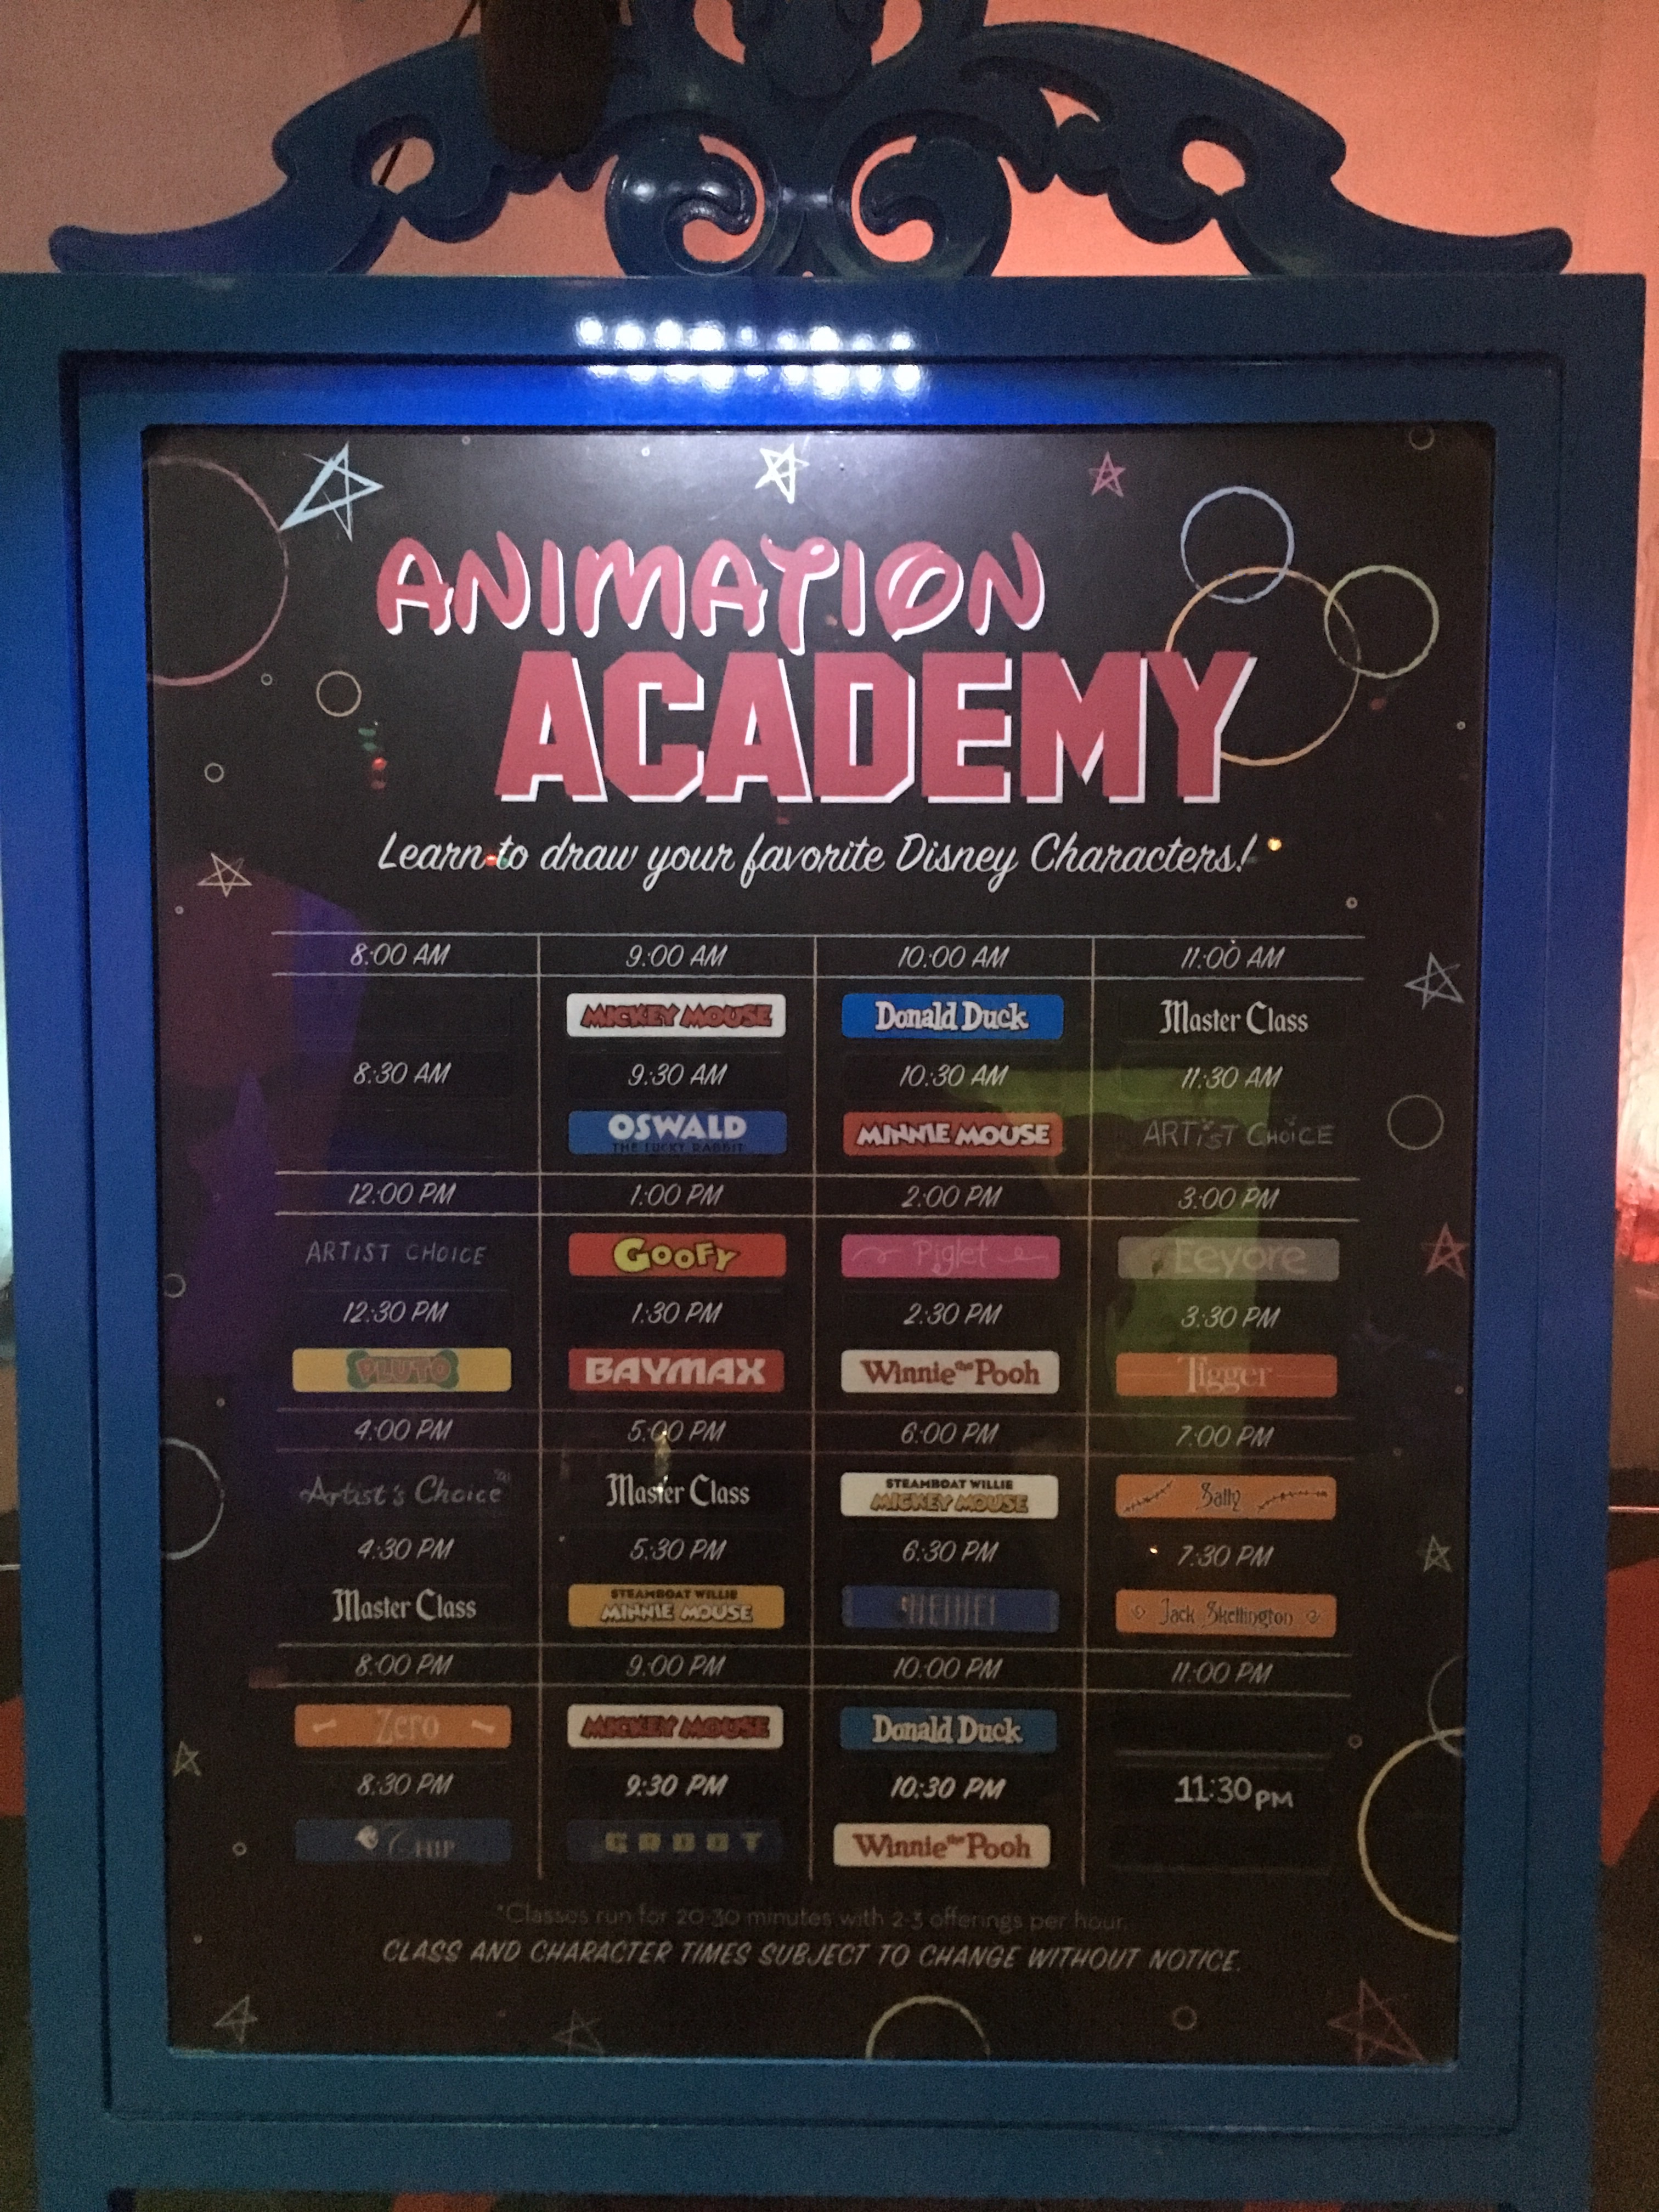 The Animation Academy schedule today Master Classes and